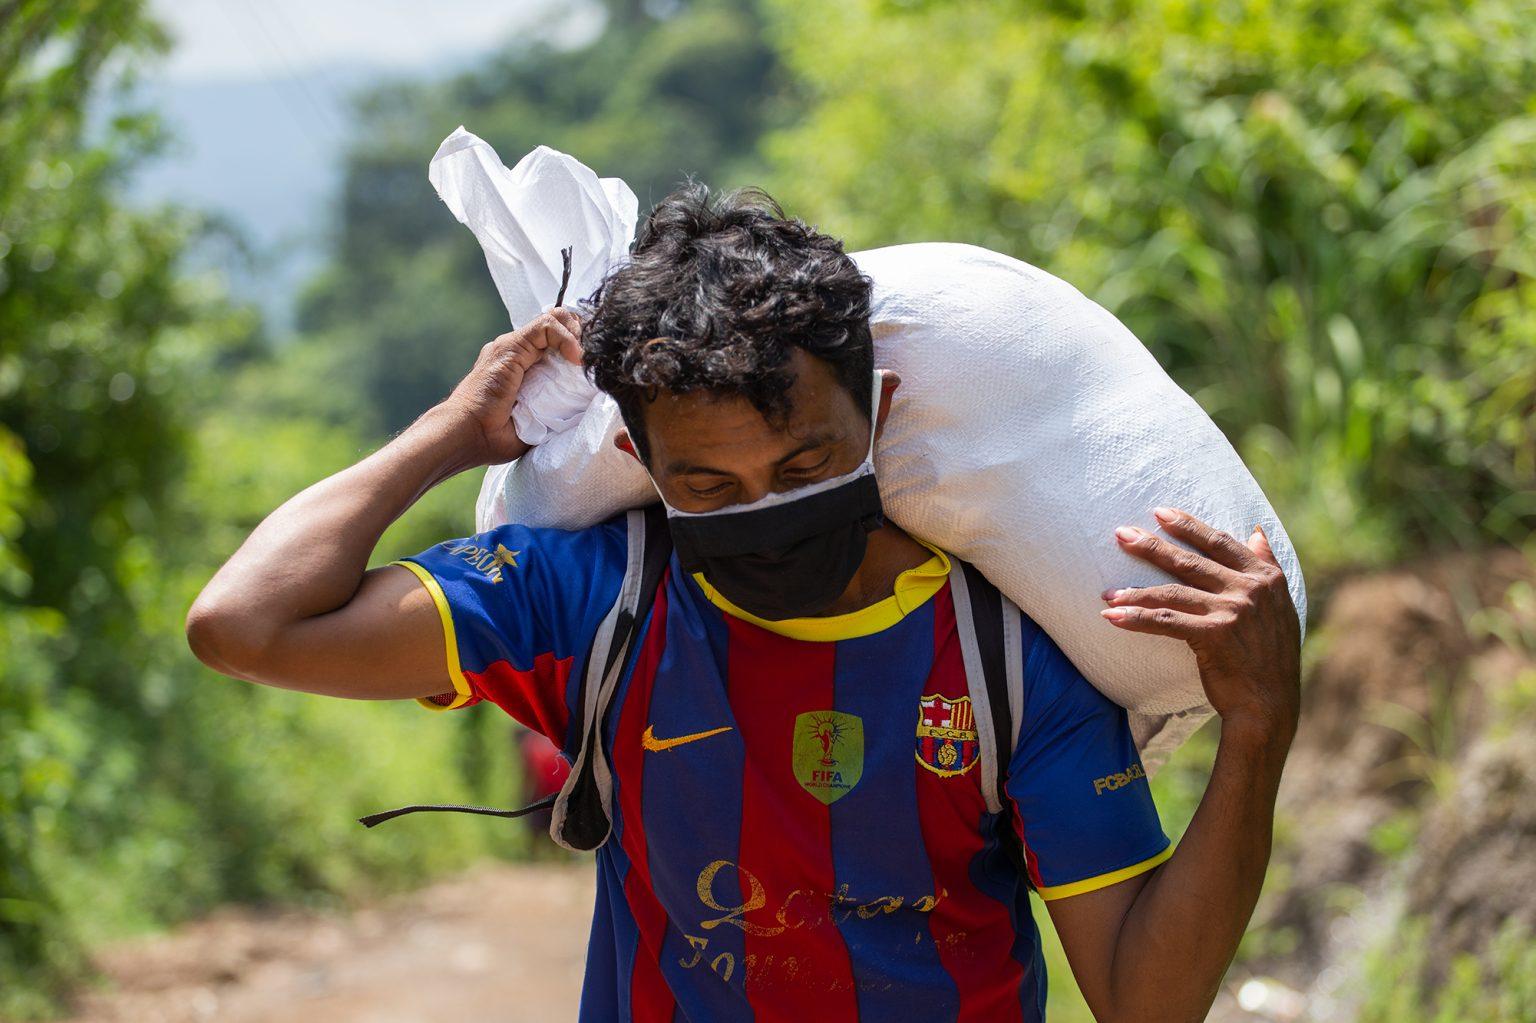 A young man carries a sack of food handed out by the Red Cross. To reach his community, the young man will have to walk at least half an hour with this sack on his back. Curarén, Francisco Morazán, August 27 2020. Photo: Martín Cálix